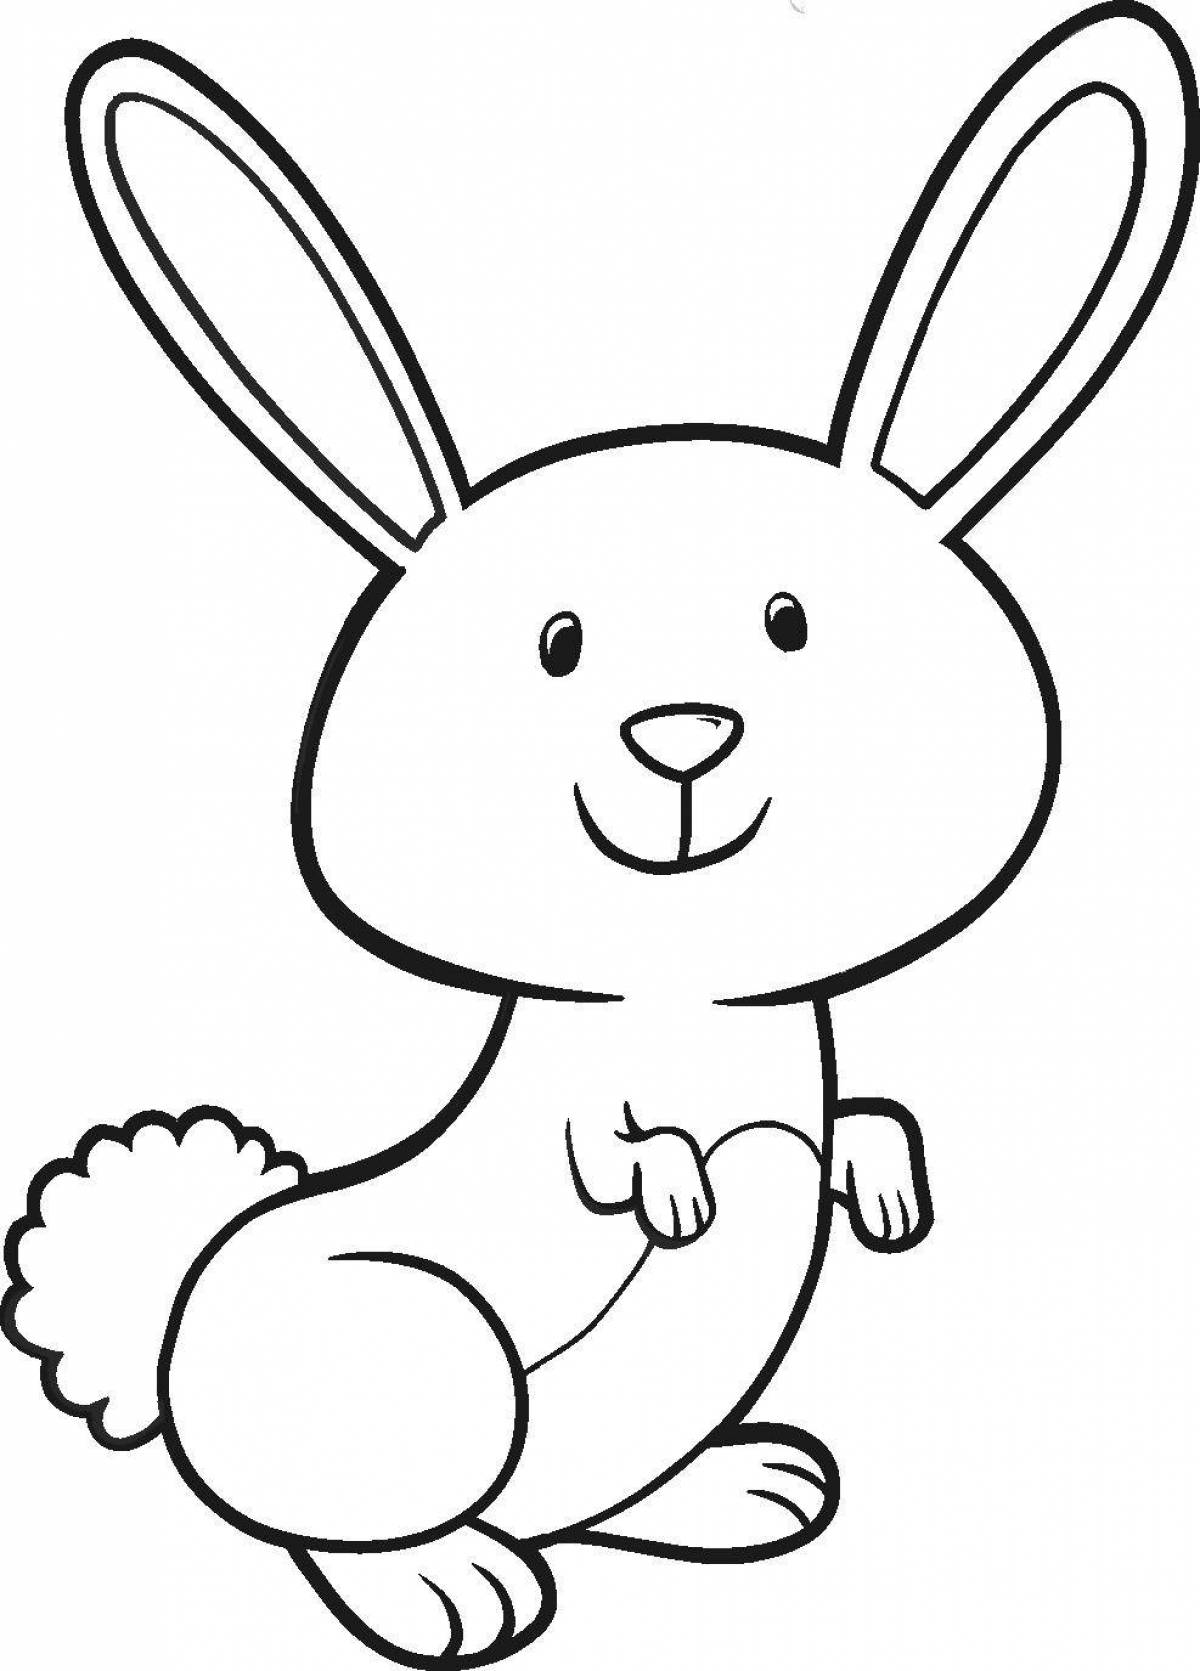 Playful rabbit coloring book for children 2-3 years old